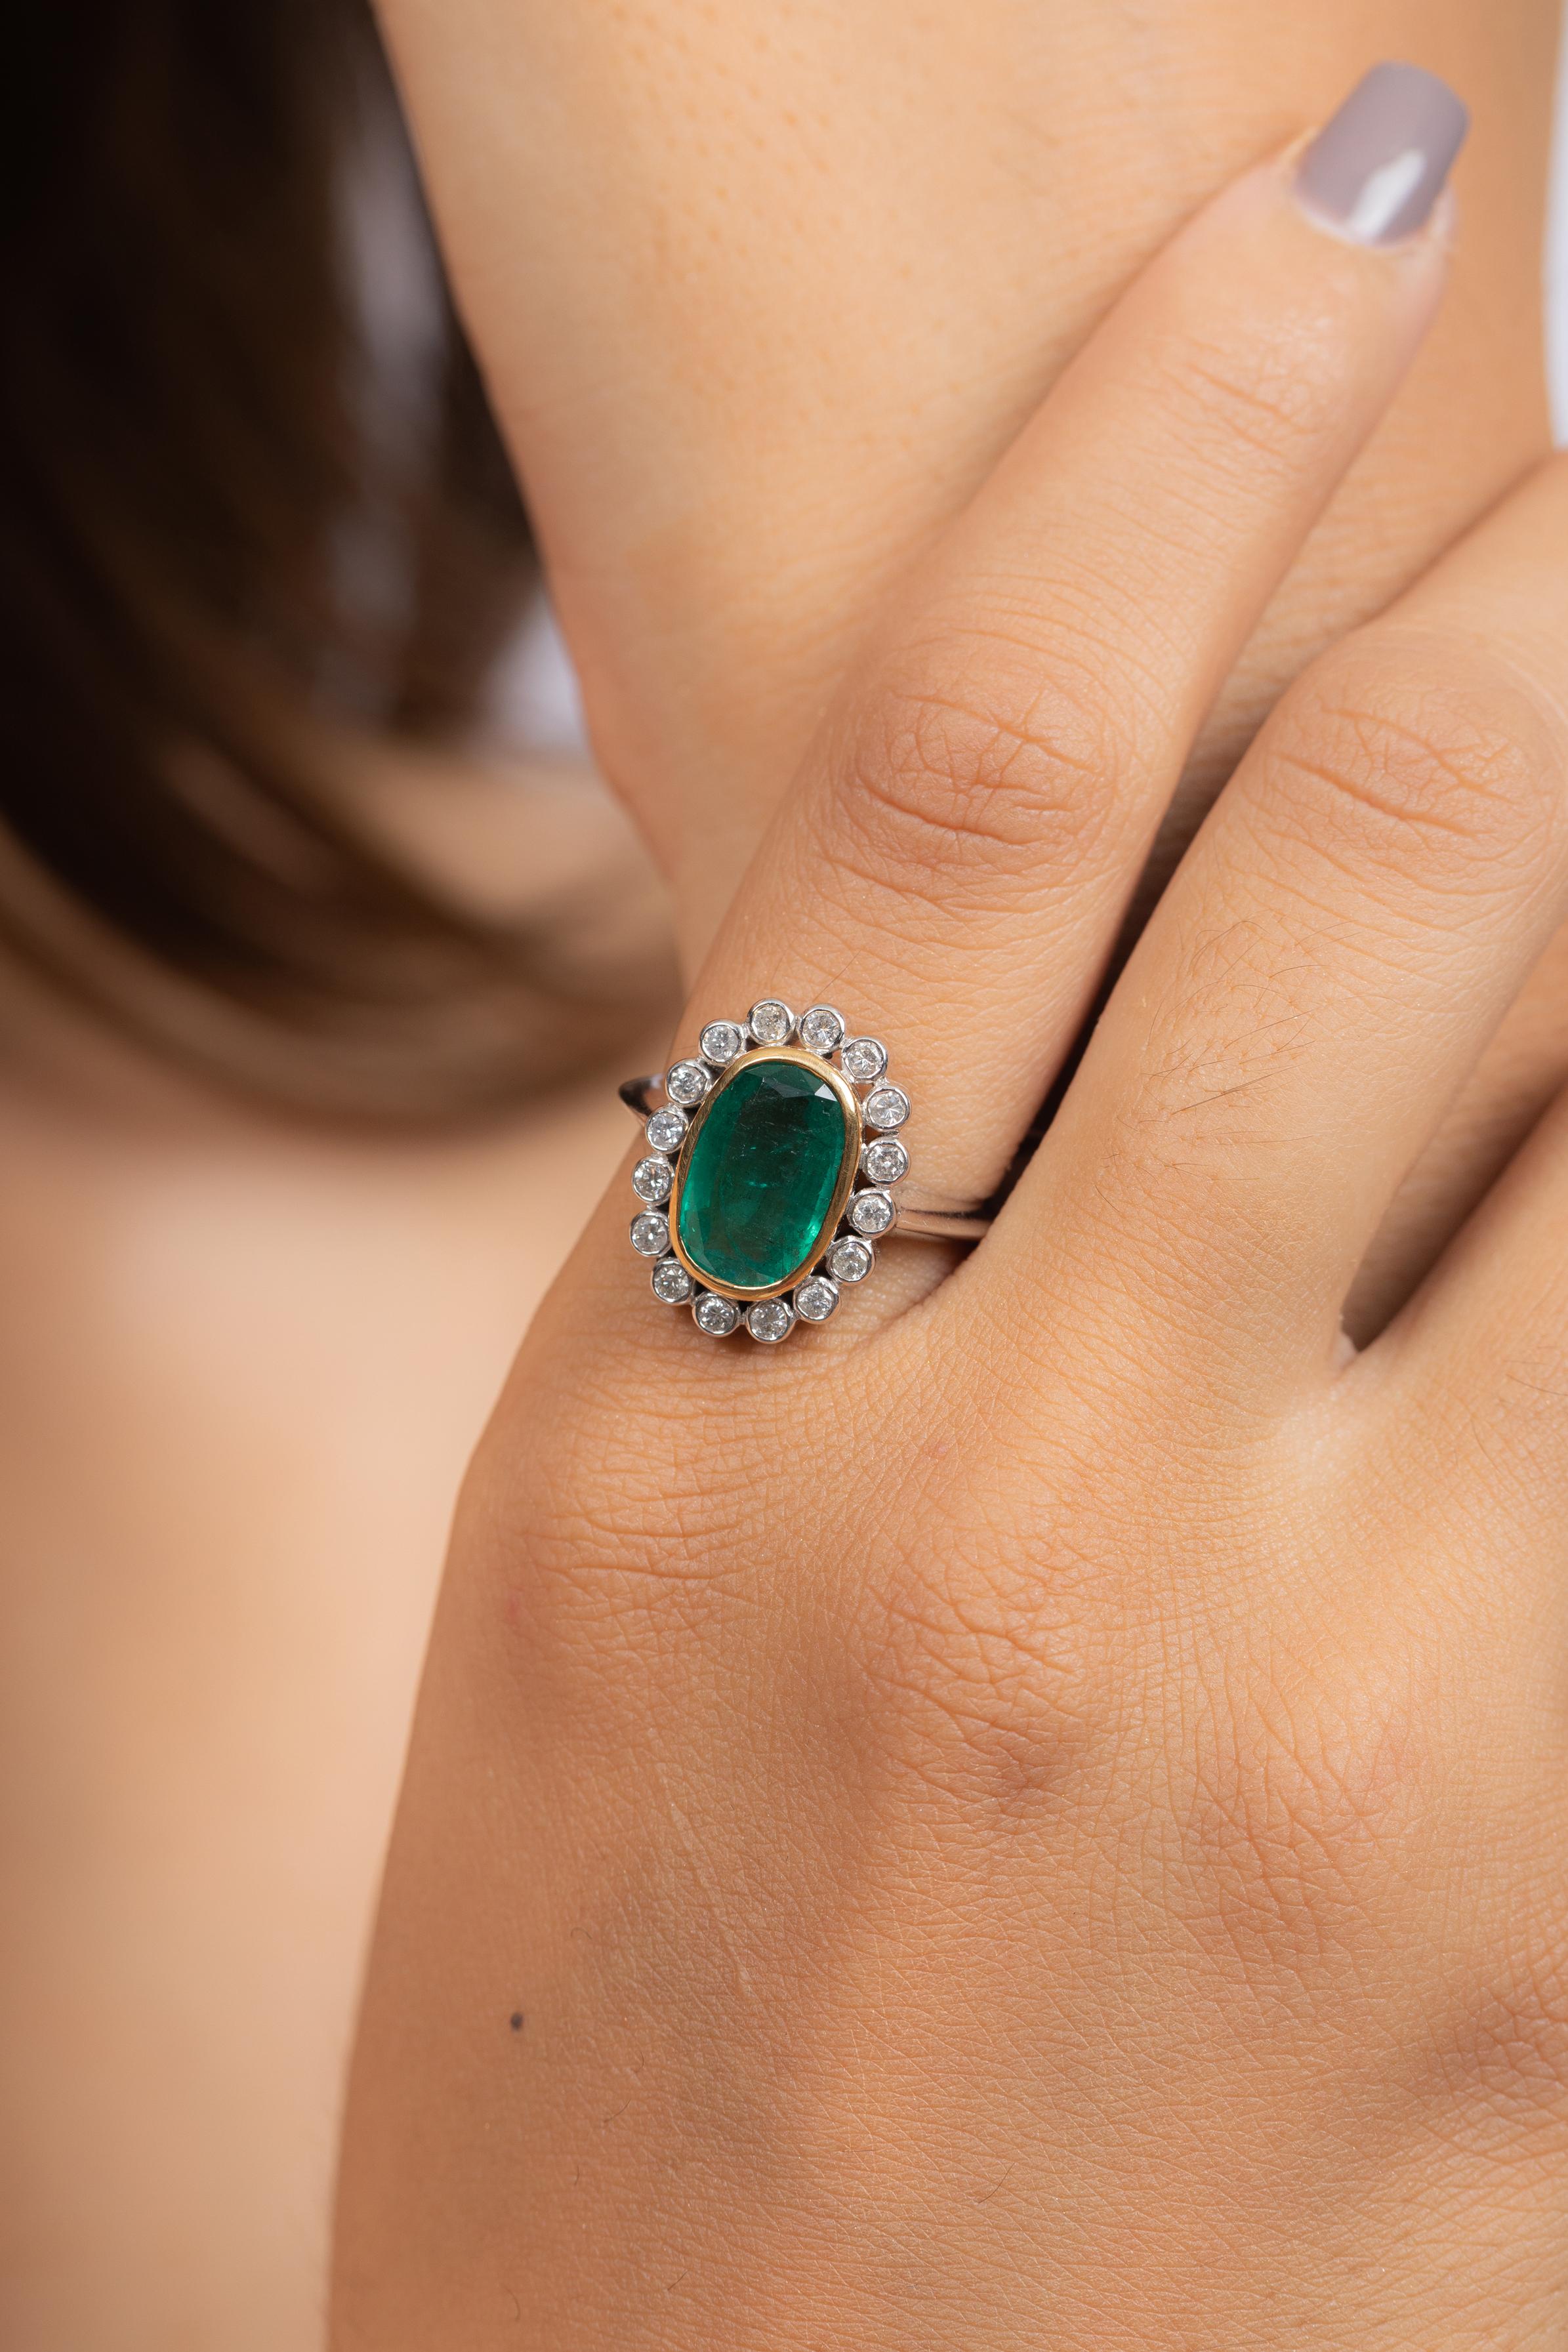 For Sale:  18K White Gold Emerald and Diamond Cocktail Ring  6